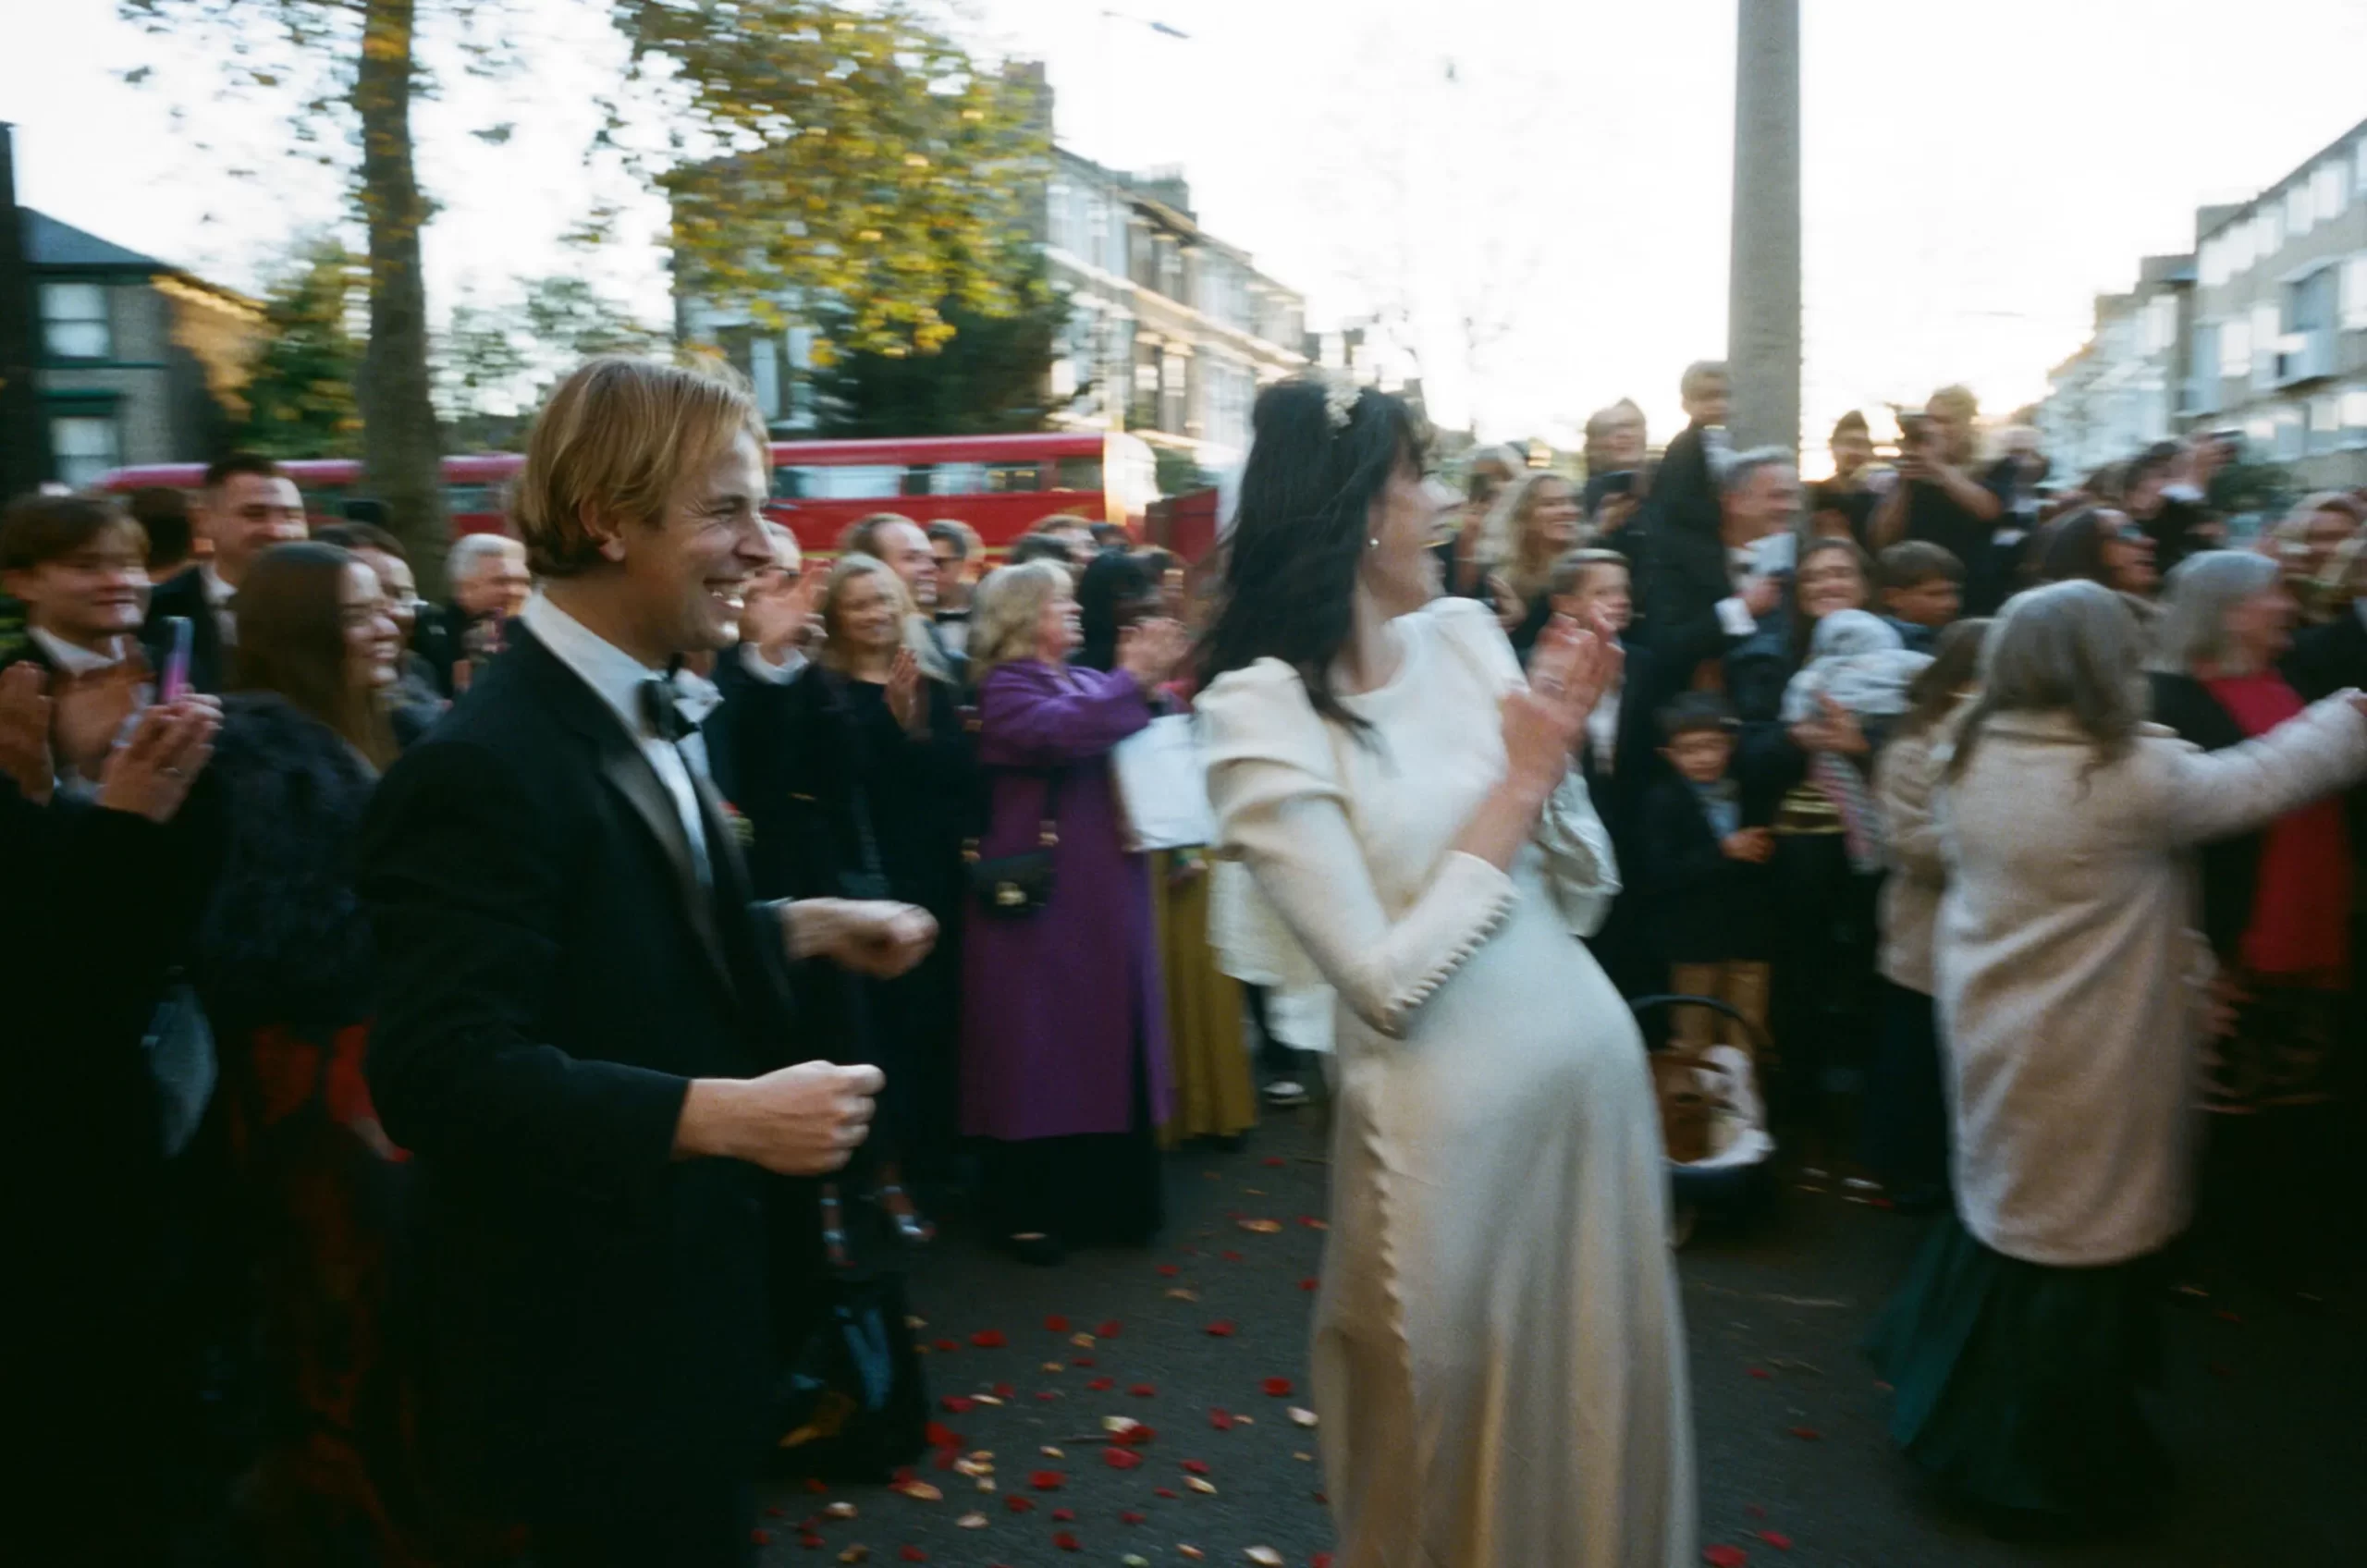 The wedding of Tom Odell and Georgie Somerville